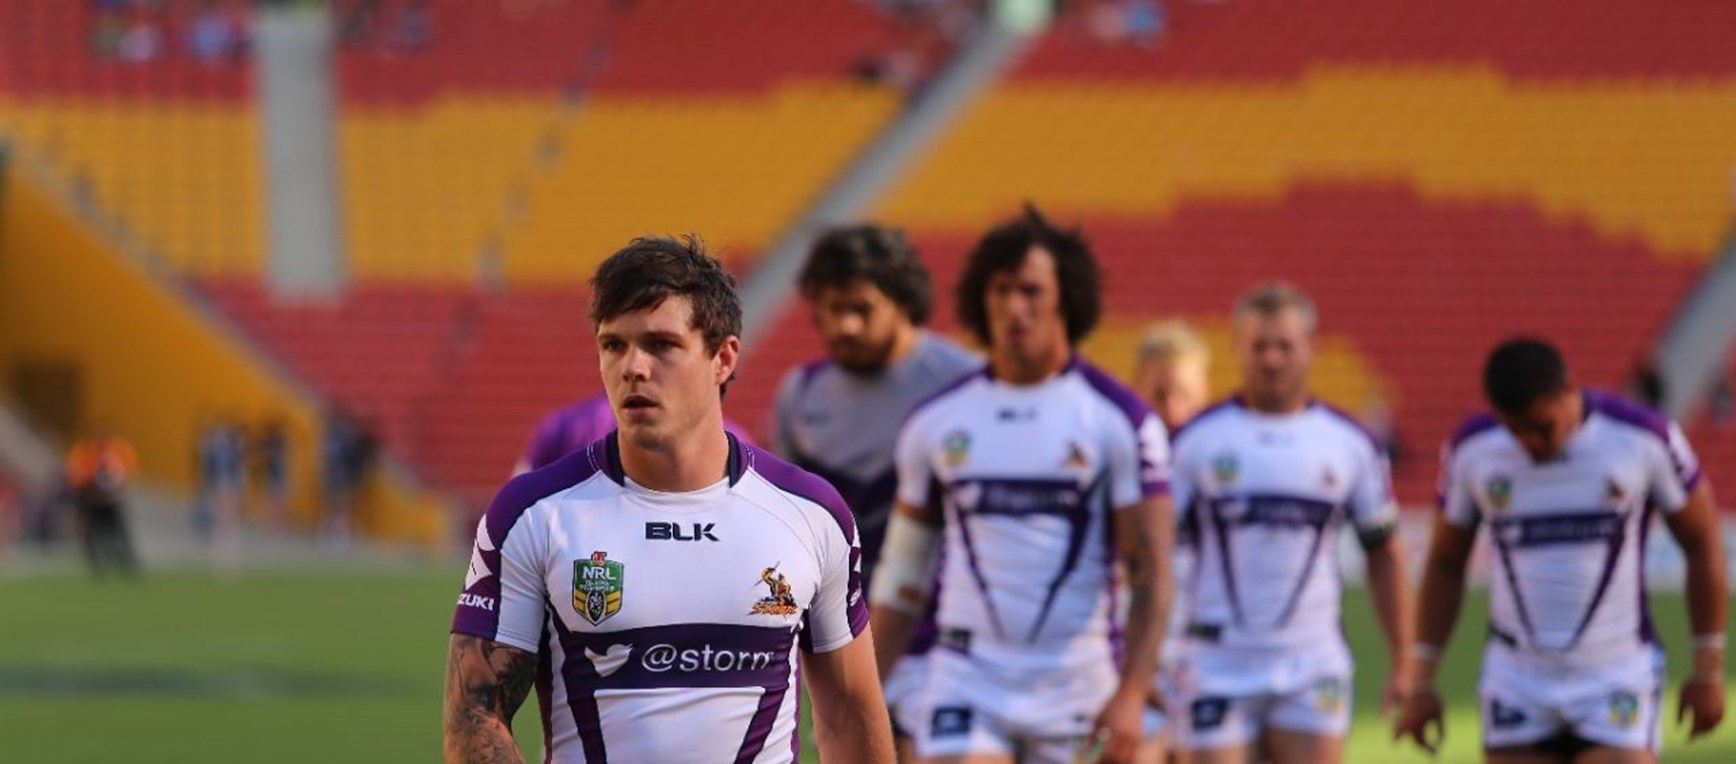 In pictures: Storm v Bulldogs